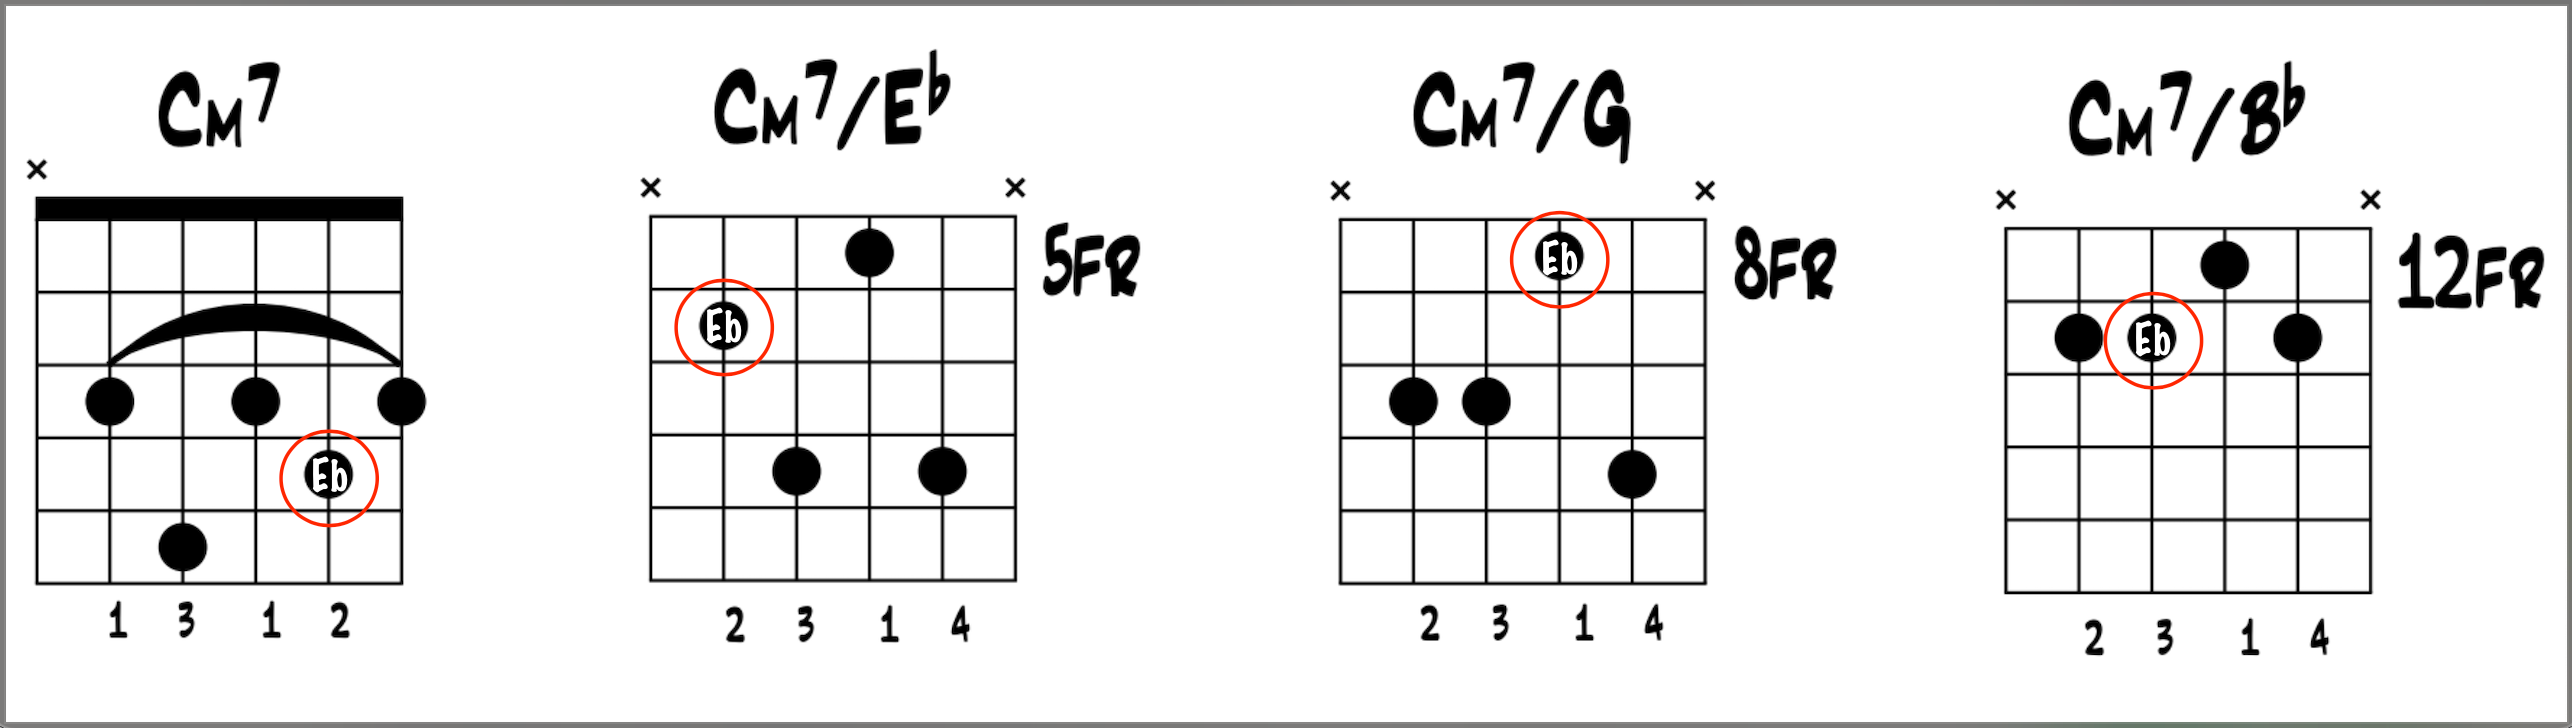 Jazz Guitar: Cm7 on the B String Group with all inversions